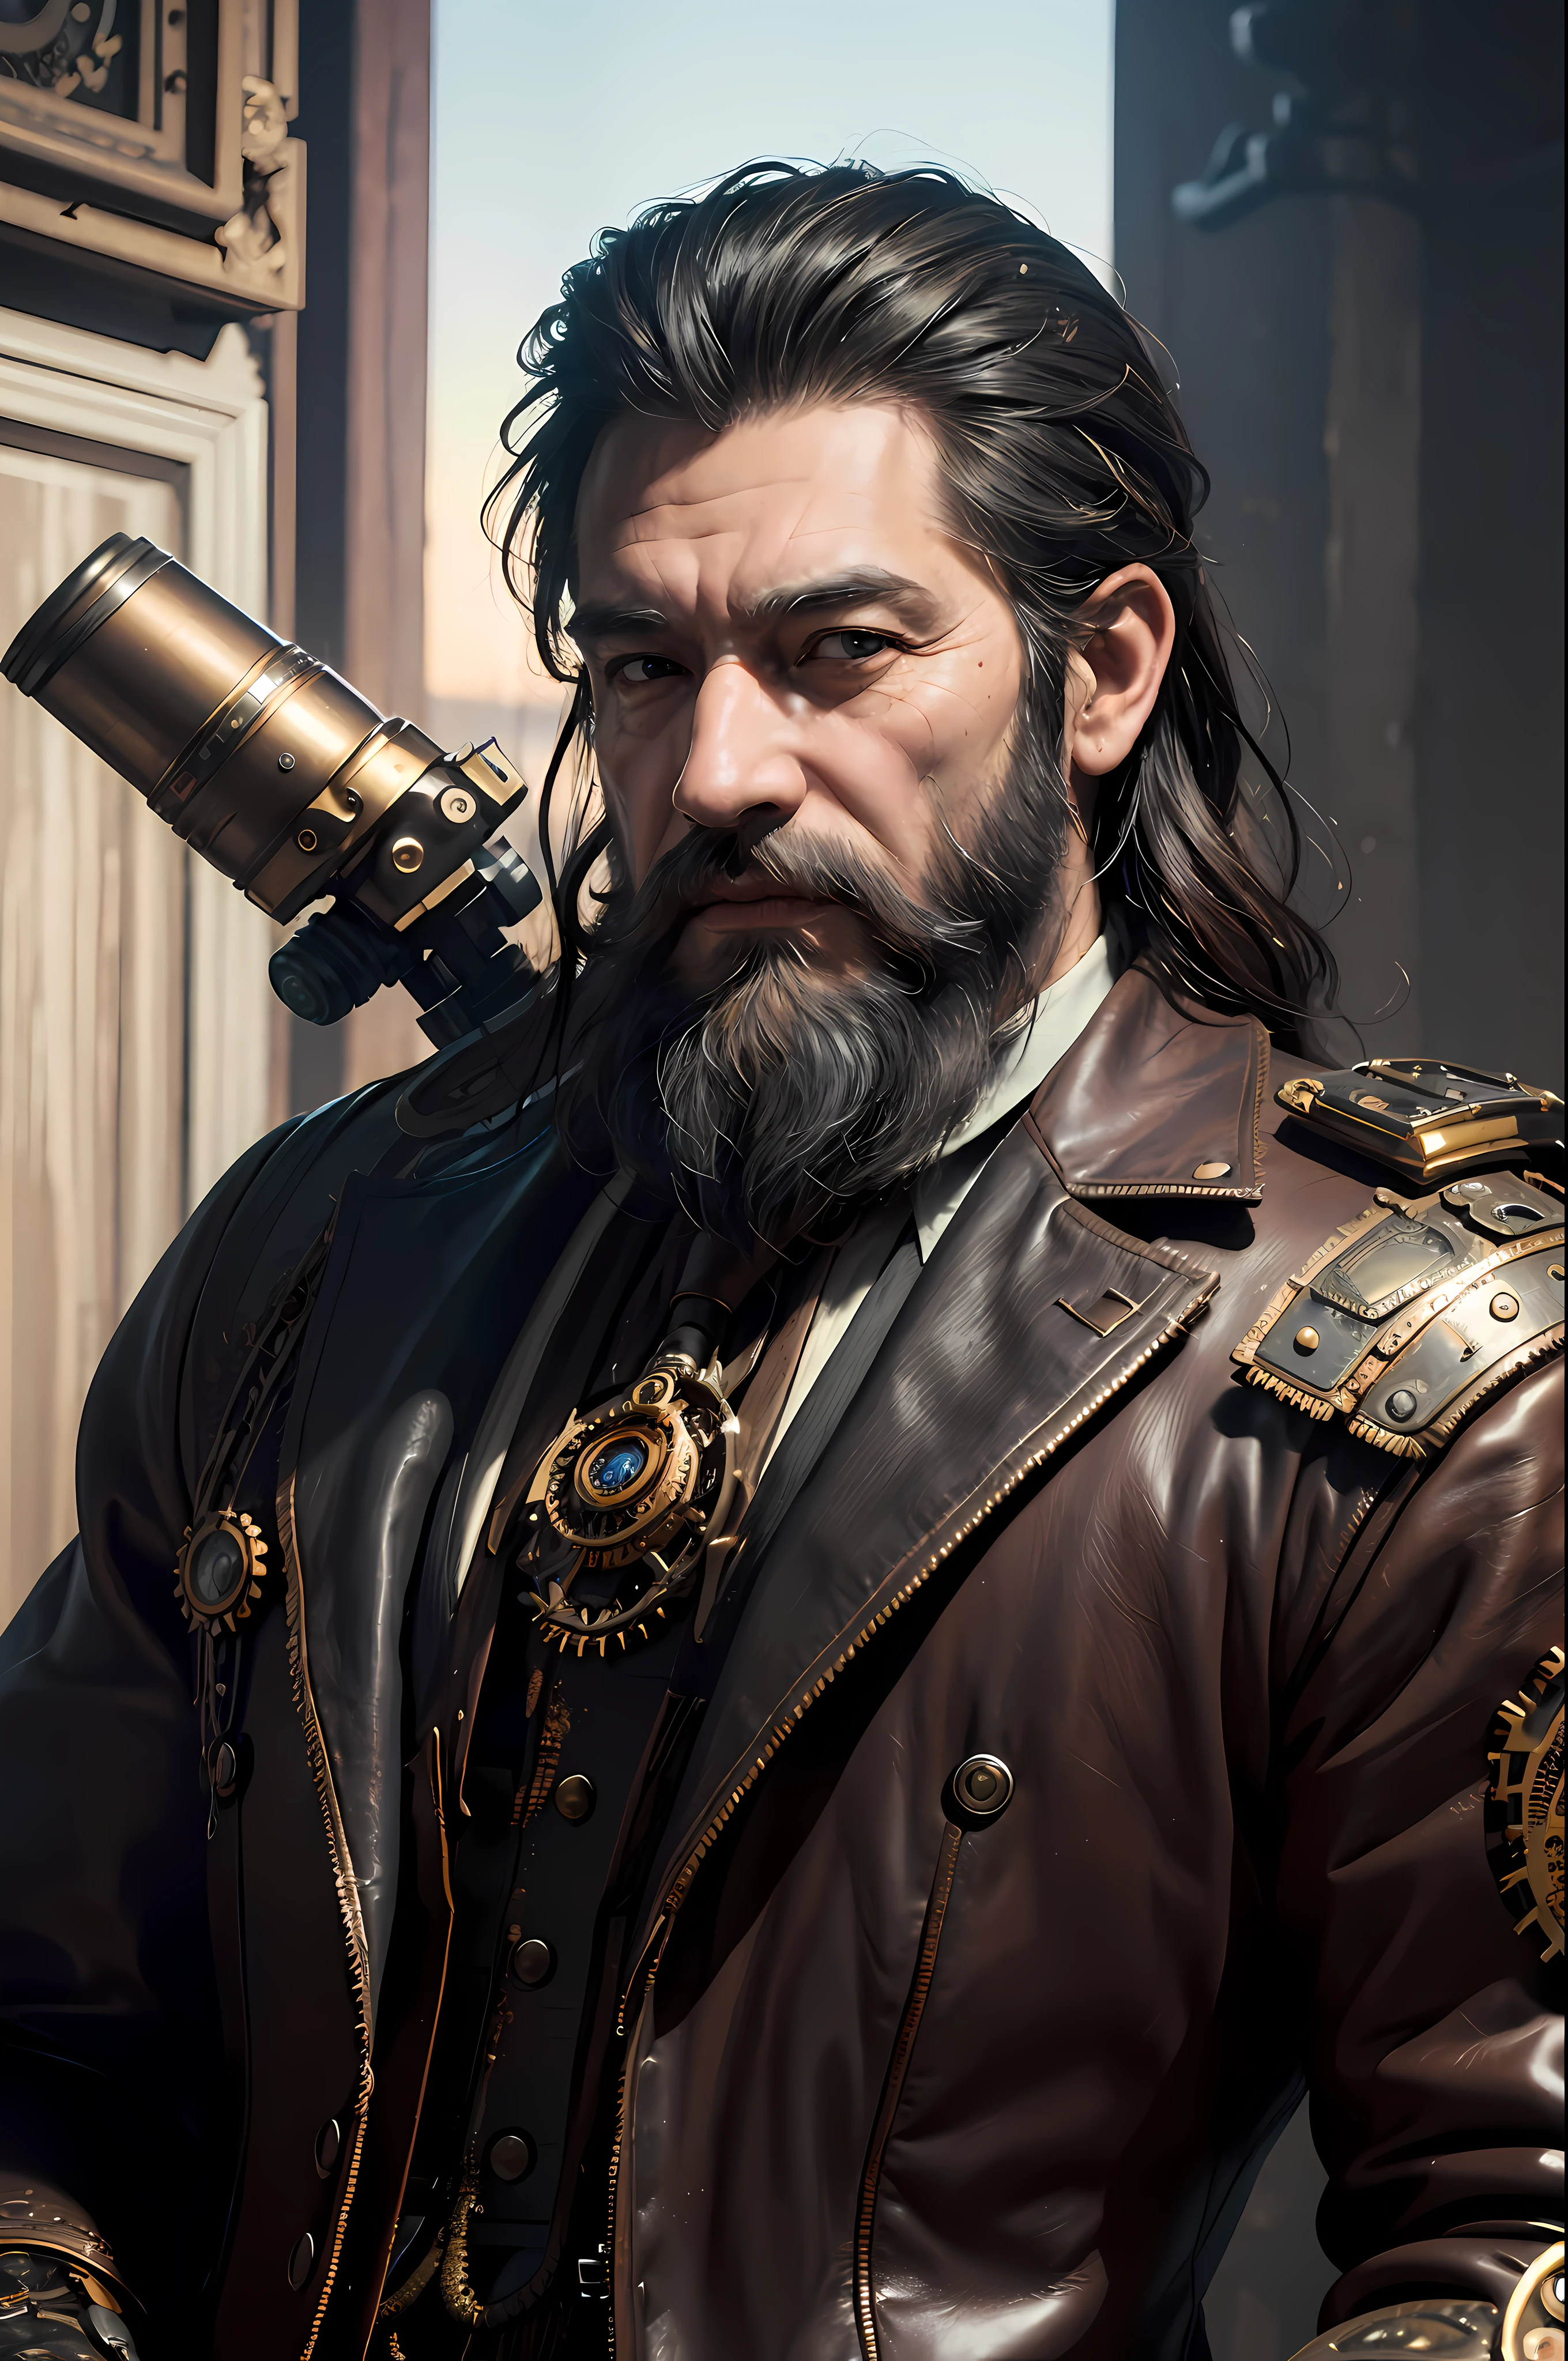 ((Masterpiece))), ((Best Quality))), ((Ultra Detailed)), (Surreal), (Highly Detailed CG Illustration), Cinematic Light, Realistic, Handsome Old Man, (Wrinkled Face and Beard), Intricate Details, Full View, Weapon, Robotic Arm, Cinematic Quality, Full Body, Short Black Hair, ((Steampunk))